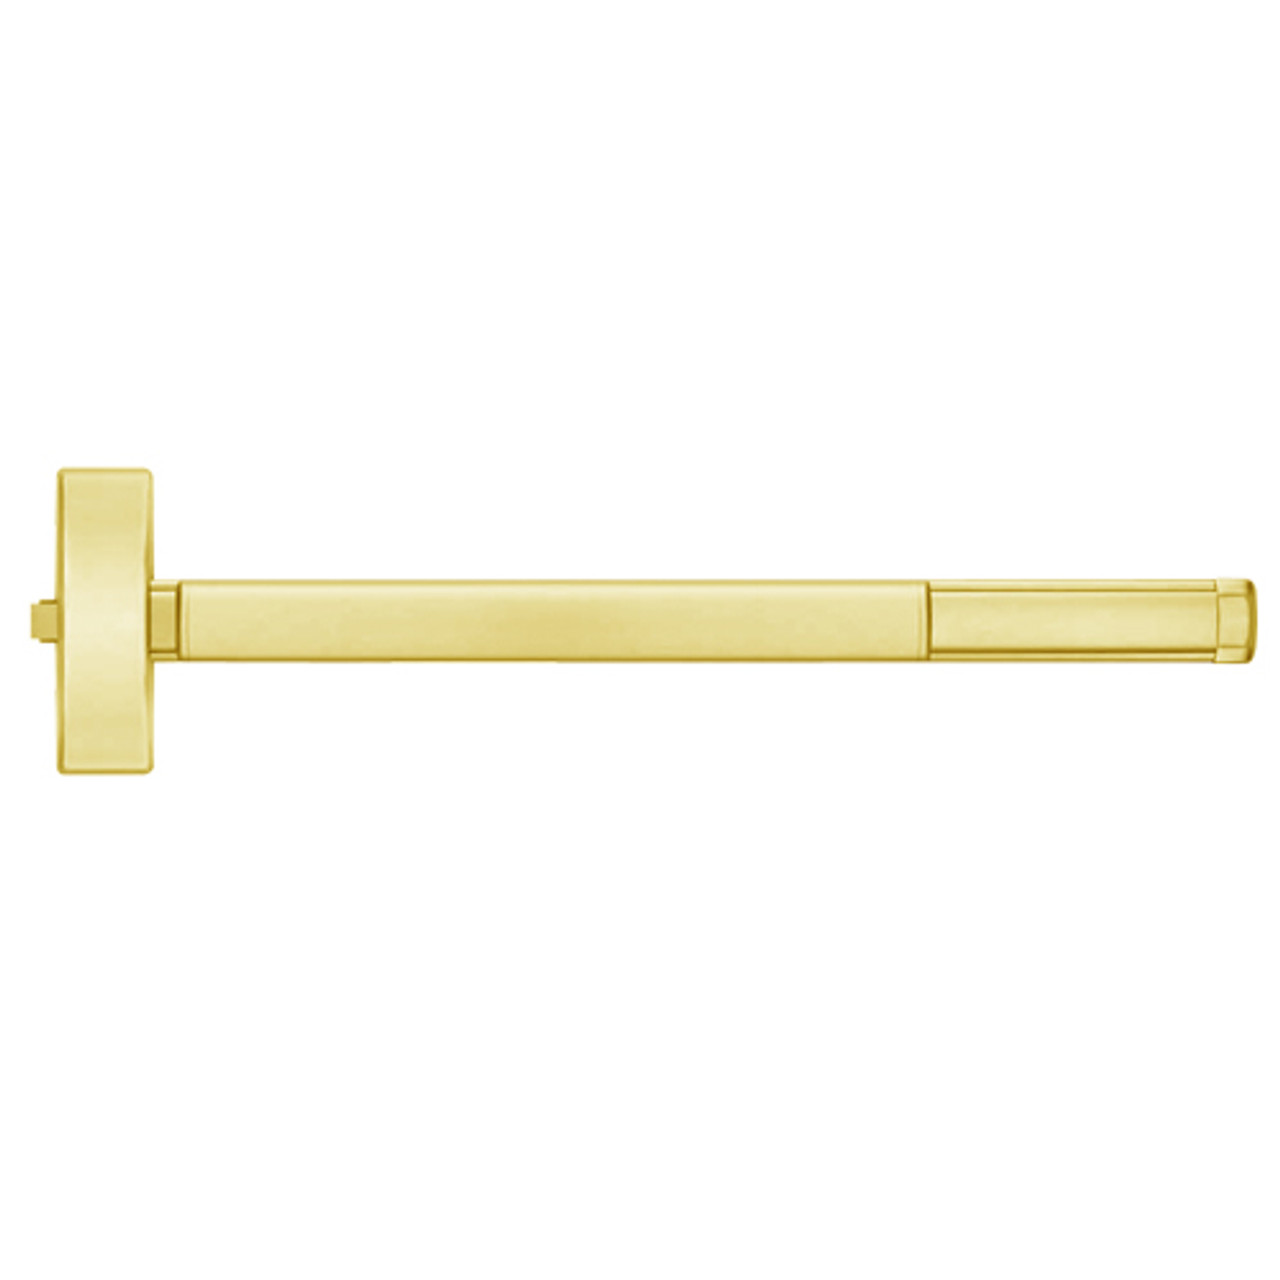 ELRFL2115-605-36 PHI 2100 Series Fire Rated Apex Rim Exit Device with Electric Latch Retraction Prepped for Thumb Piece Always Active in Bright Brass Finish